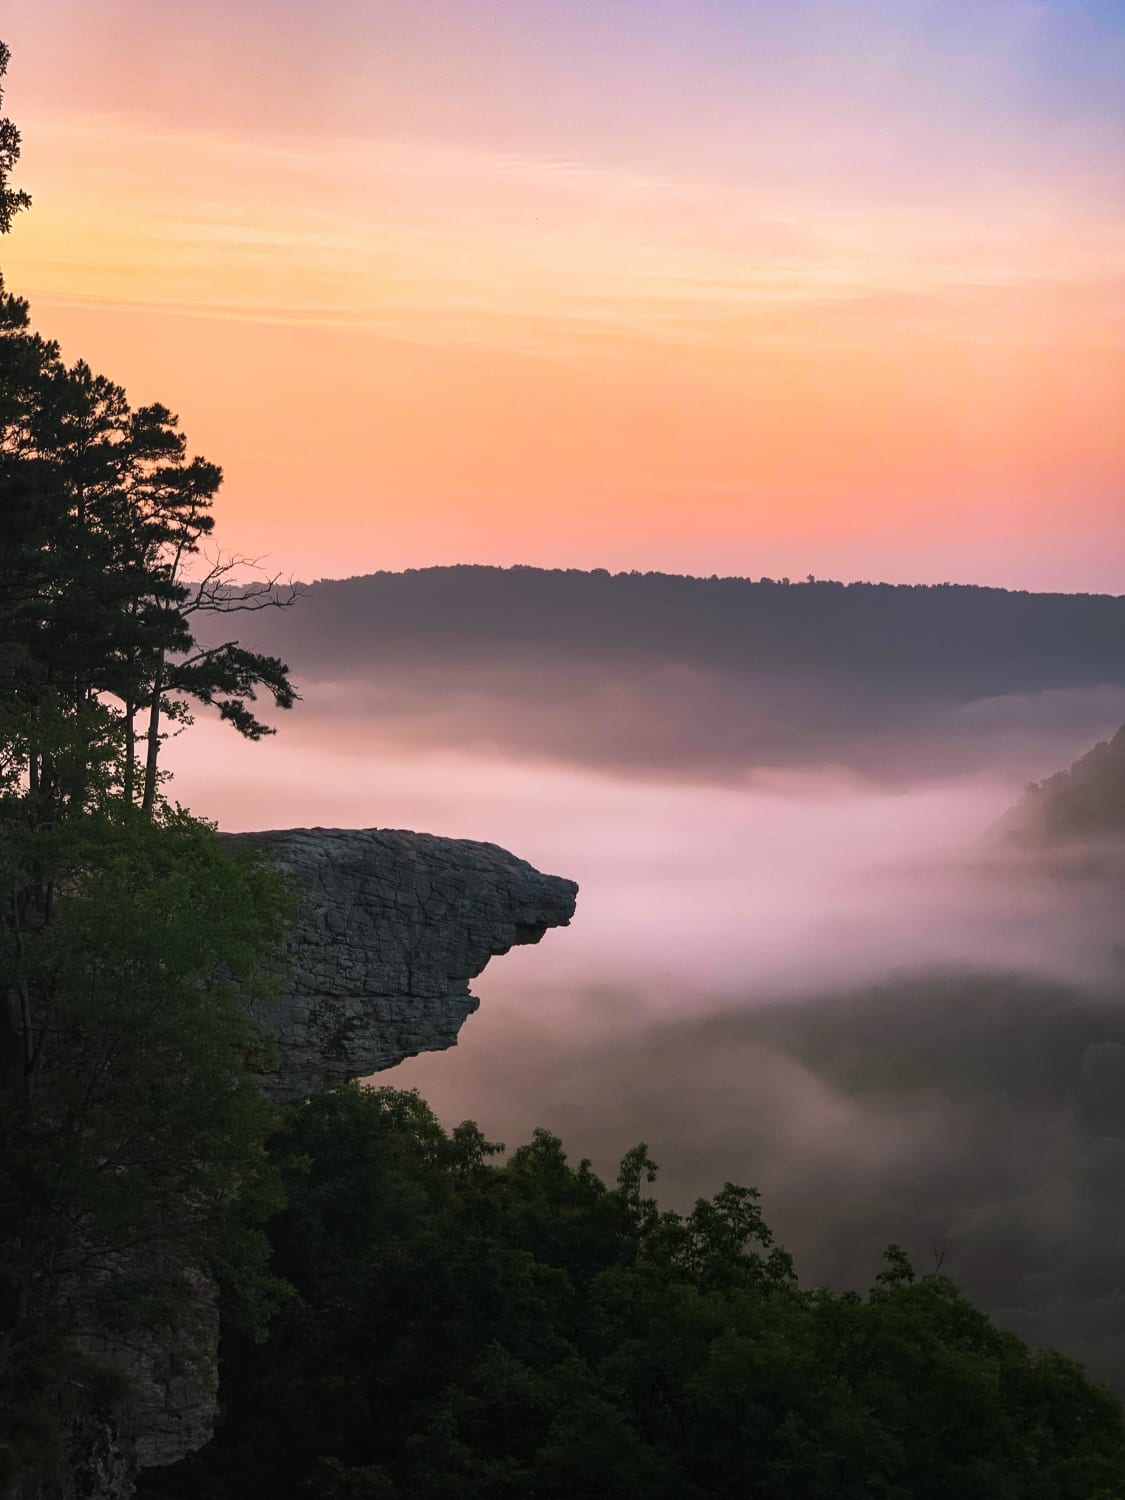 Don't think I've ever seen Arkansas posted on here before. Caught this gorgeous sunrise in Ozark National Forest.